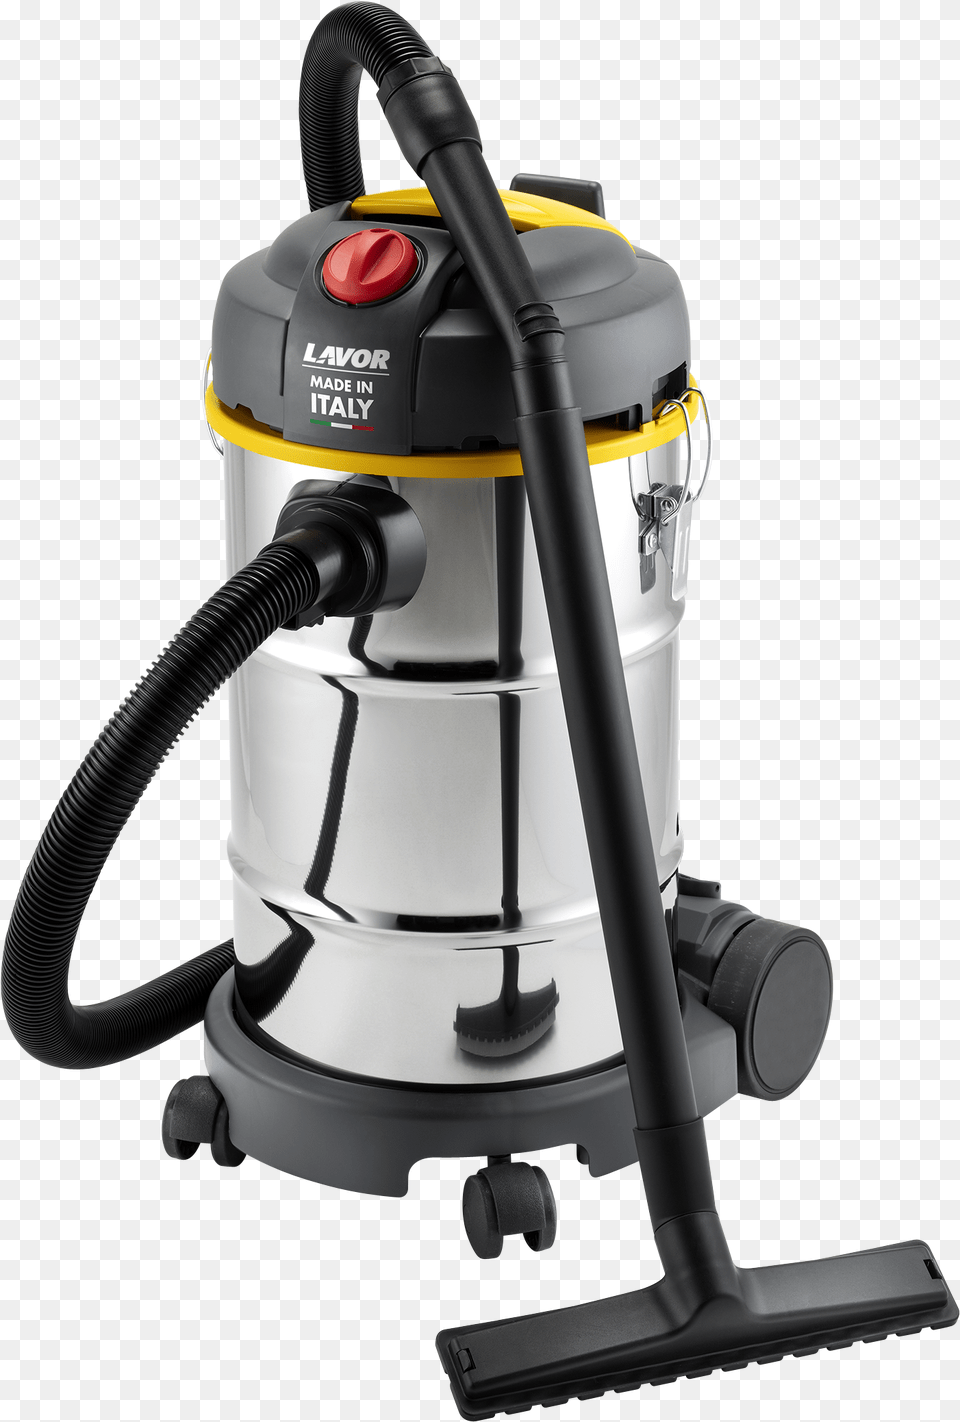 Lavor Wt 30 X Wt 30 X Lavor, Appliance, Device, Electrical Device, Vacuum Cleaner Png